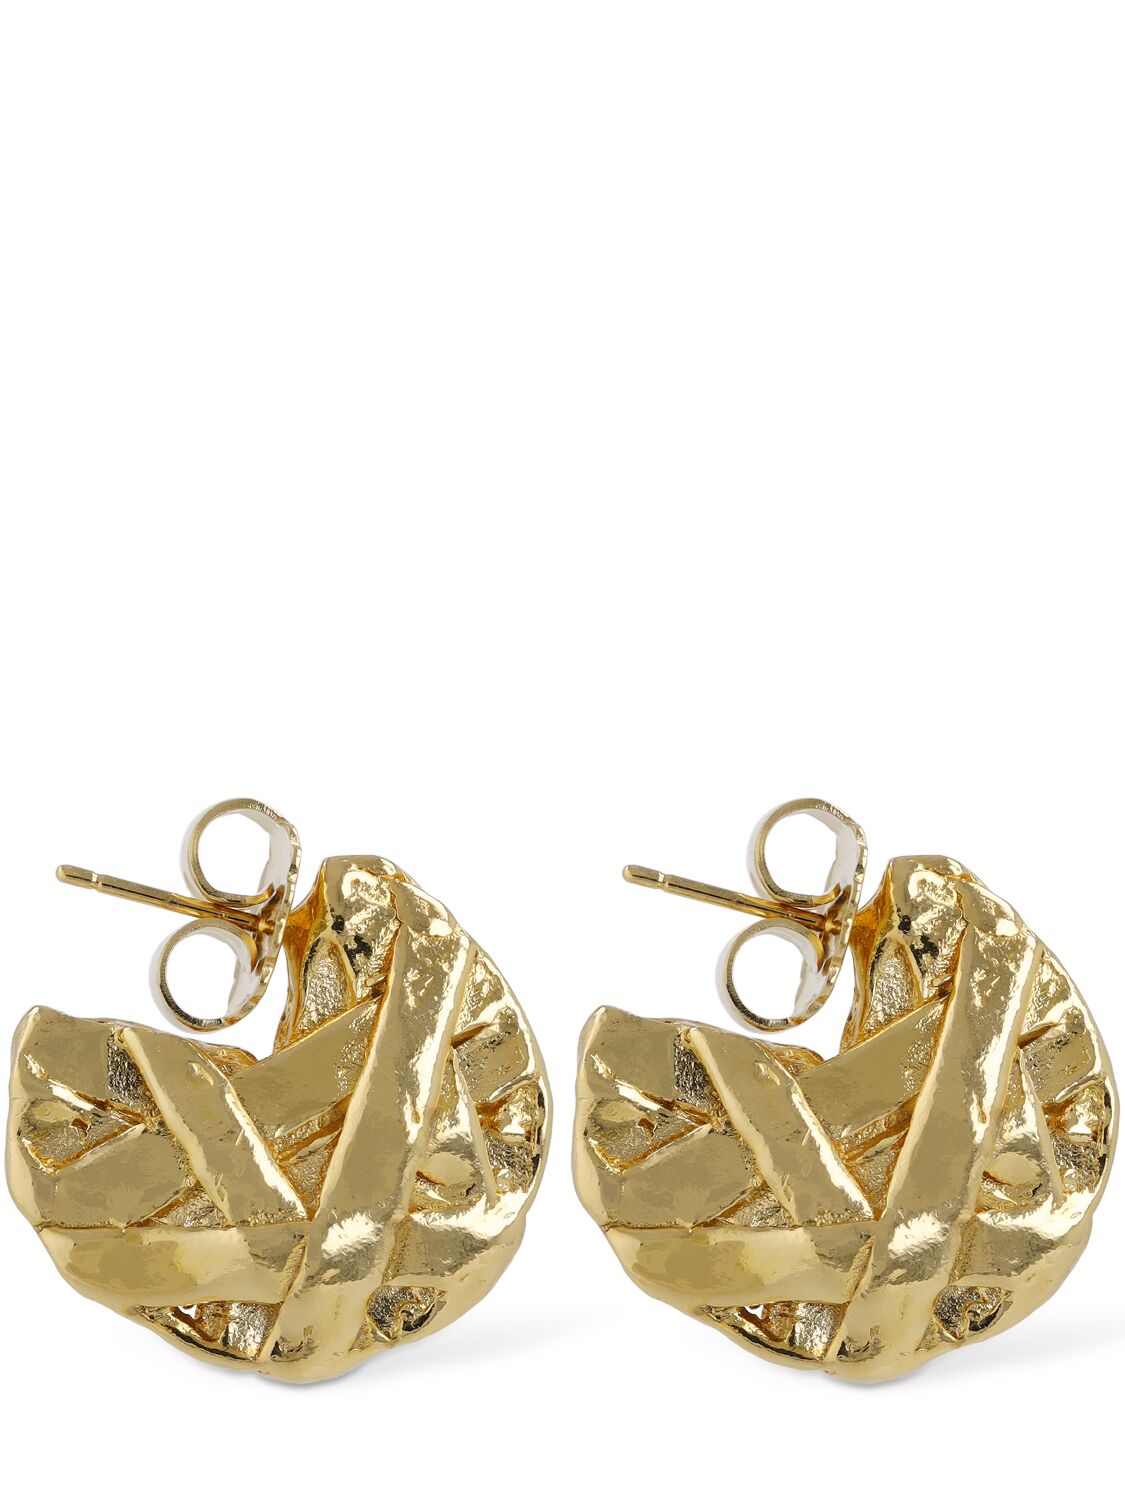 Paola Sighinolfi Small Icon Hoop Earrings In Gold